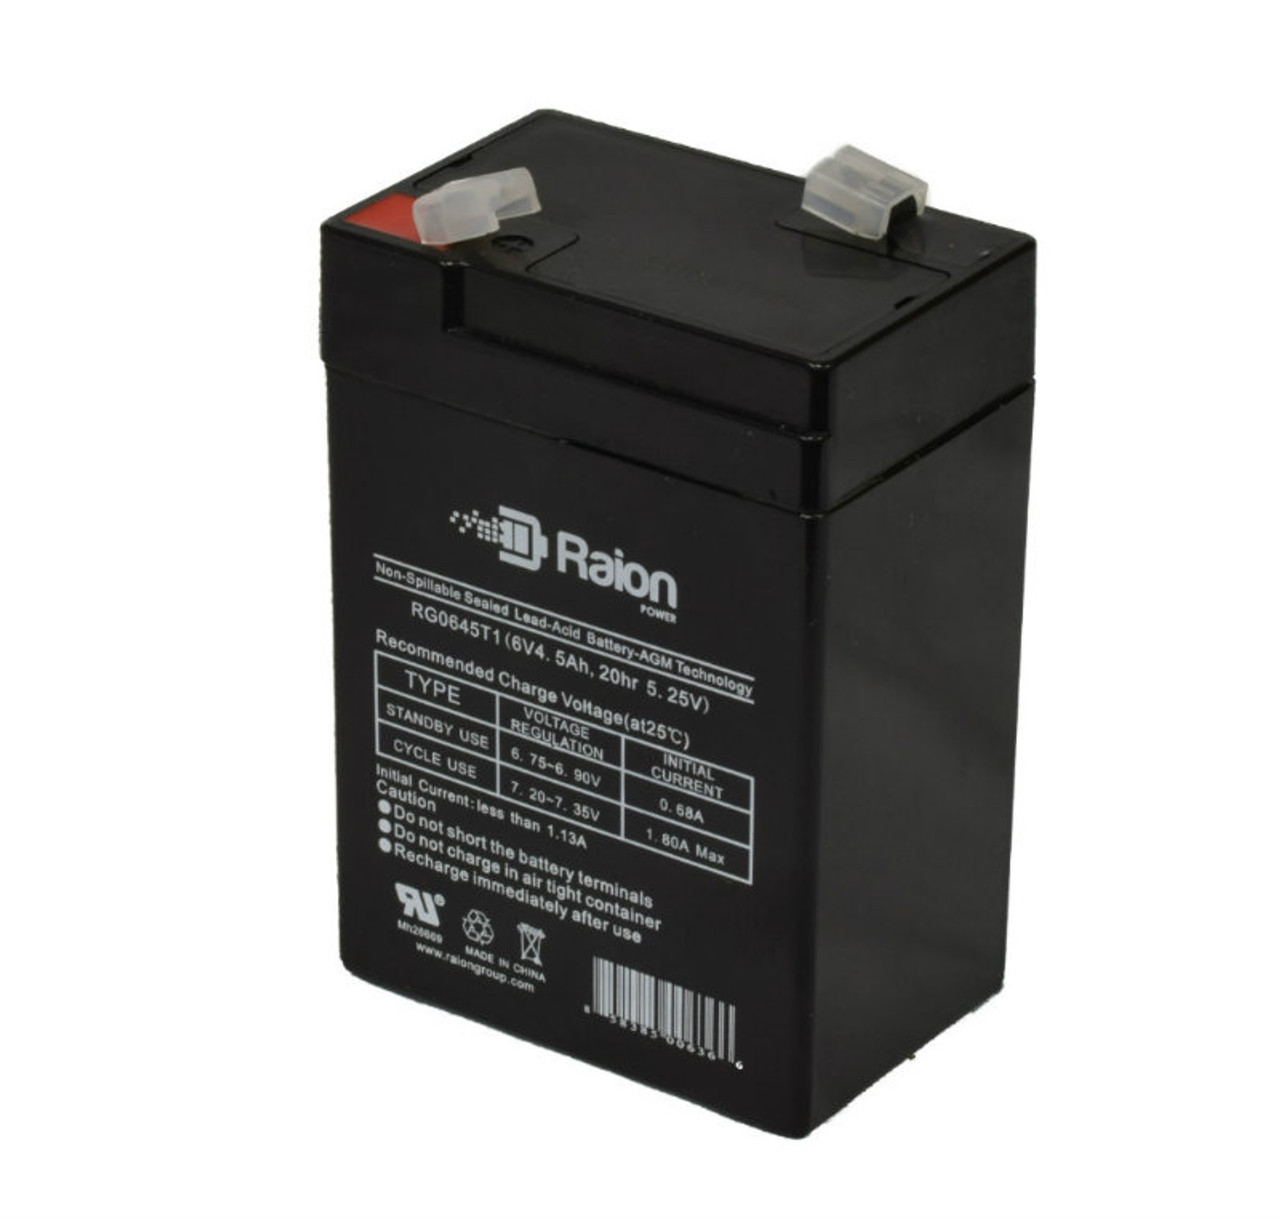 Raion Power RG0645T1 6V 4.5Ah Replacement Battery Cartridge for MUST FC6-4